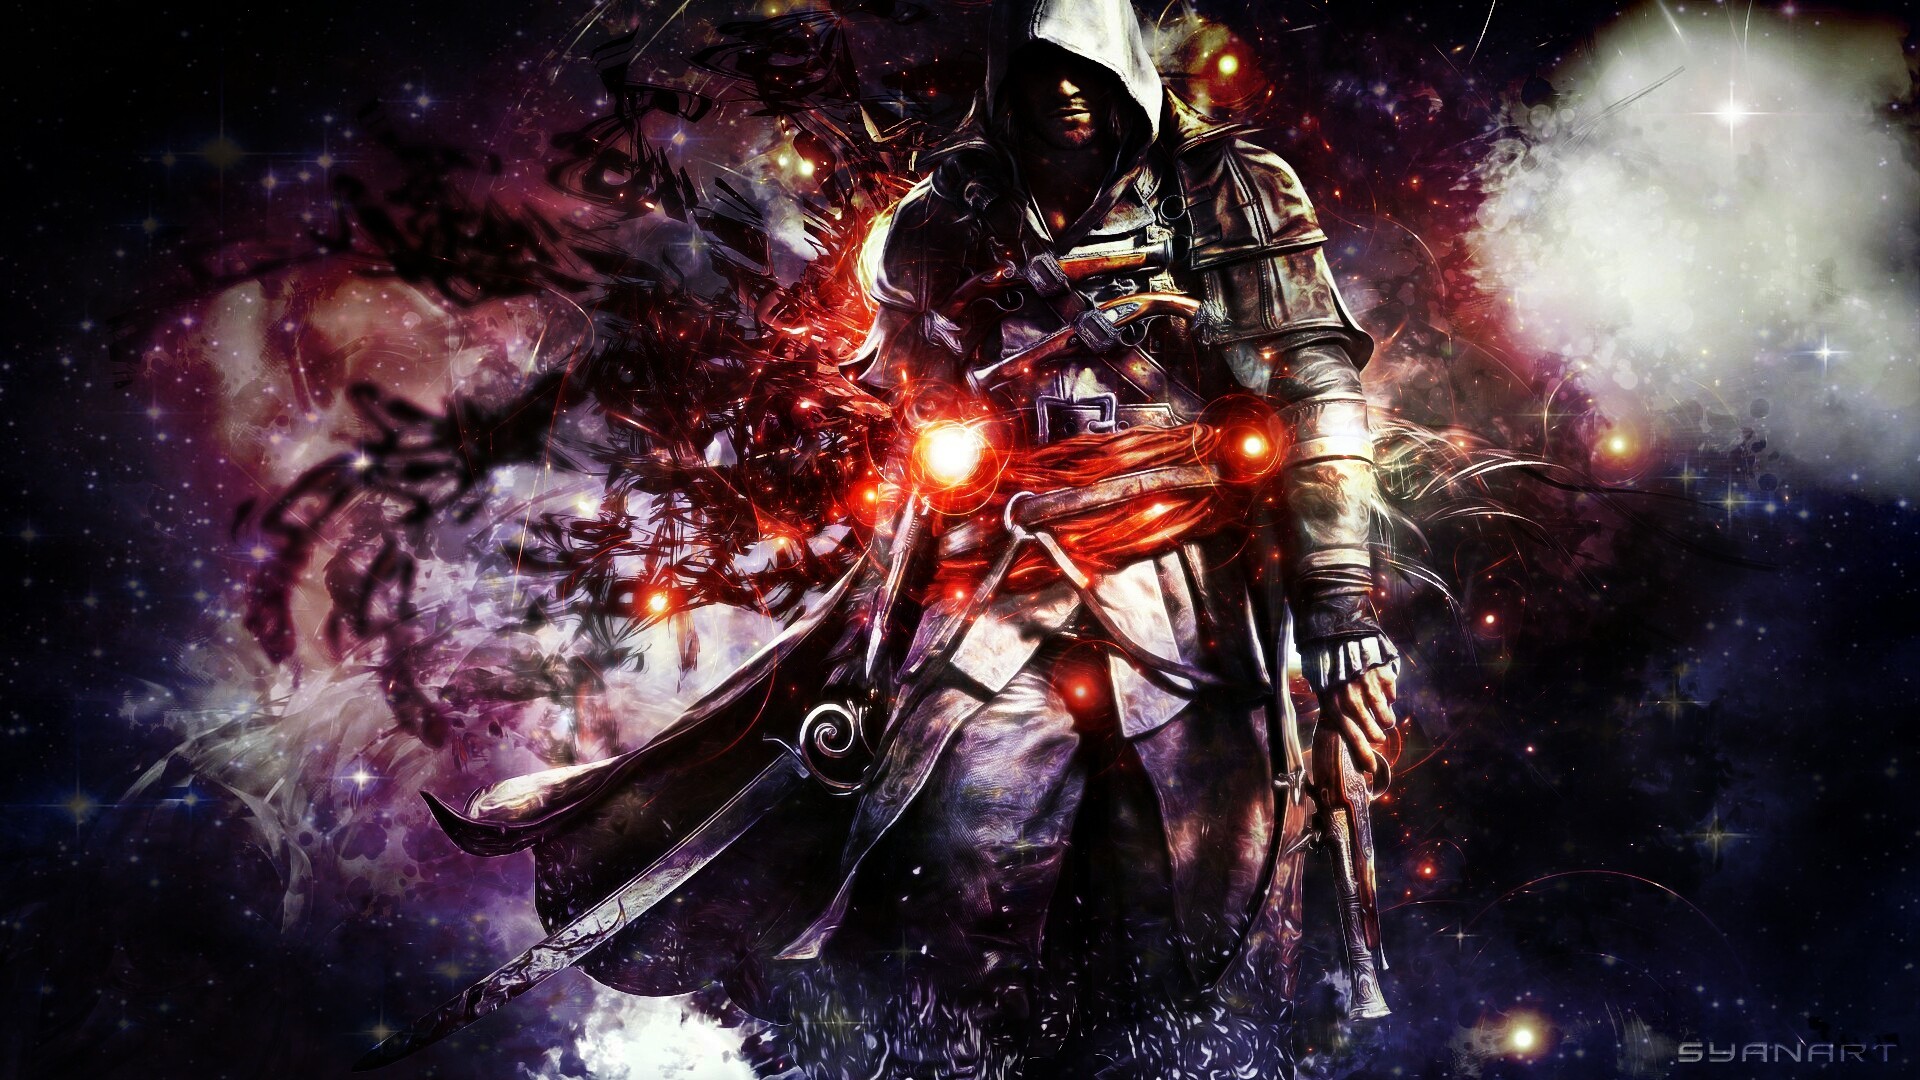 General 1920x1080 Assassin's Creed edit Video Game Heroes video games video game warriors PC gaming